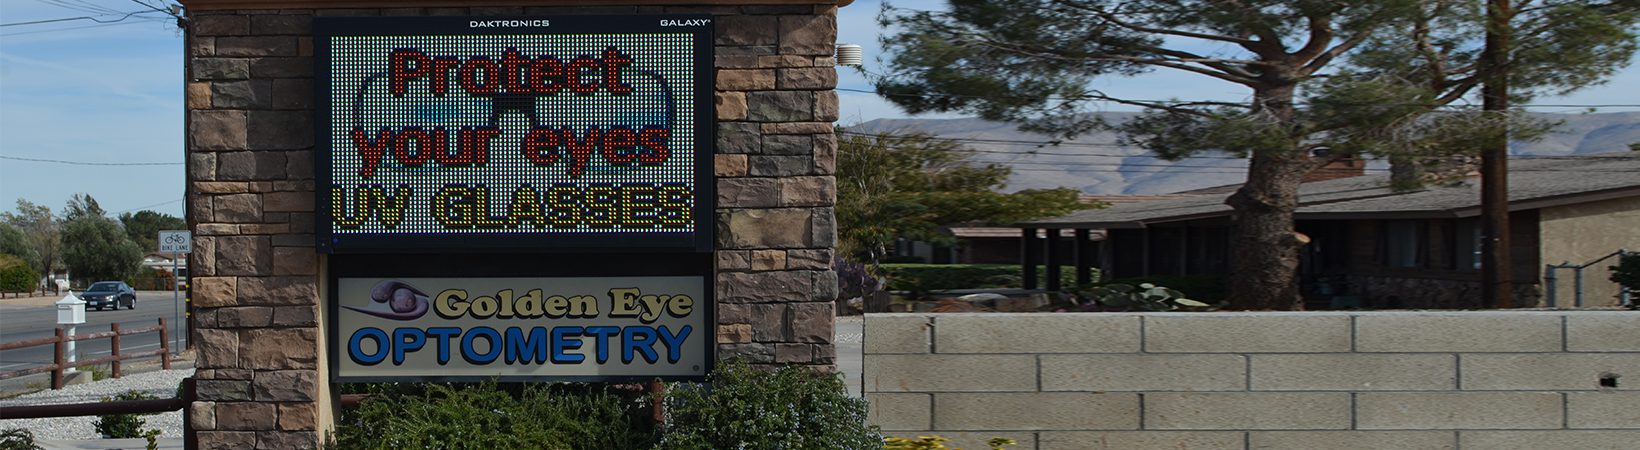 Golden Eye Optometry Sign with protect your eyes text